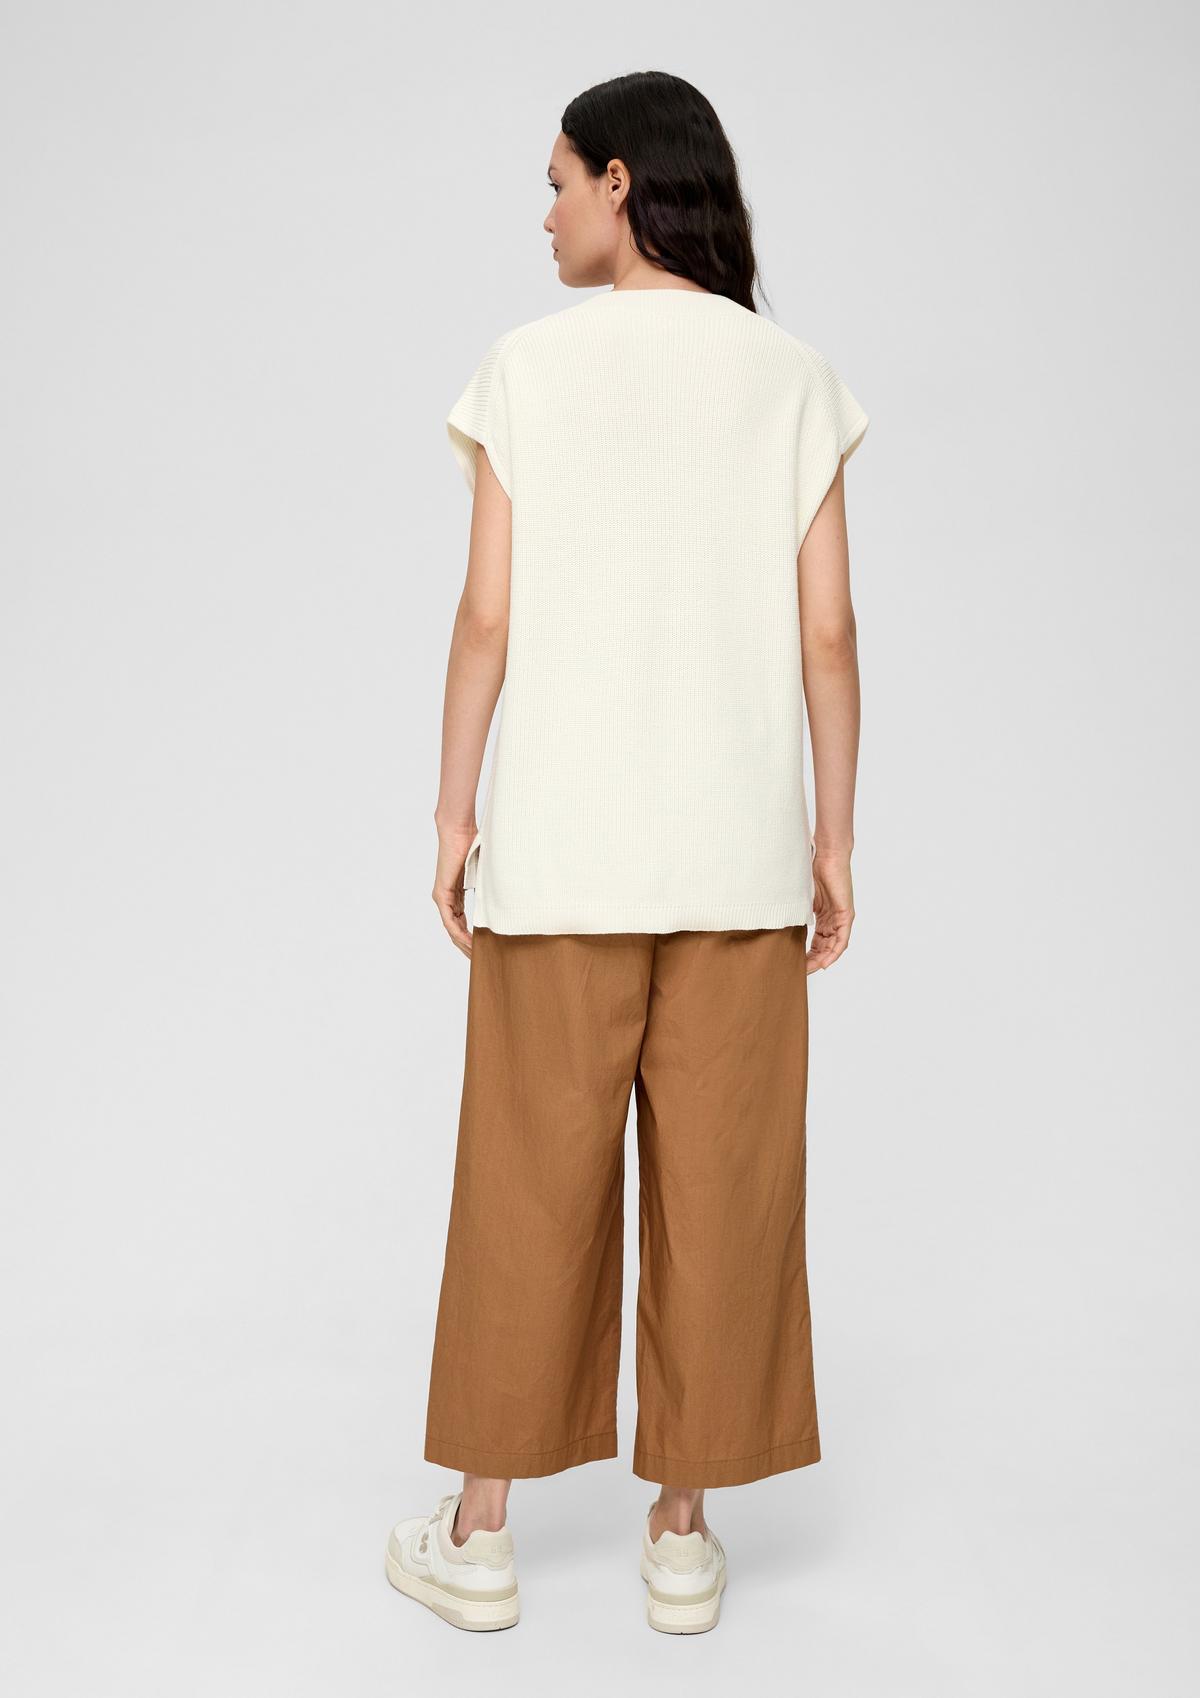 s.Oliver Sleeveless jumper in a cotton blend